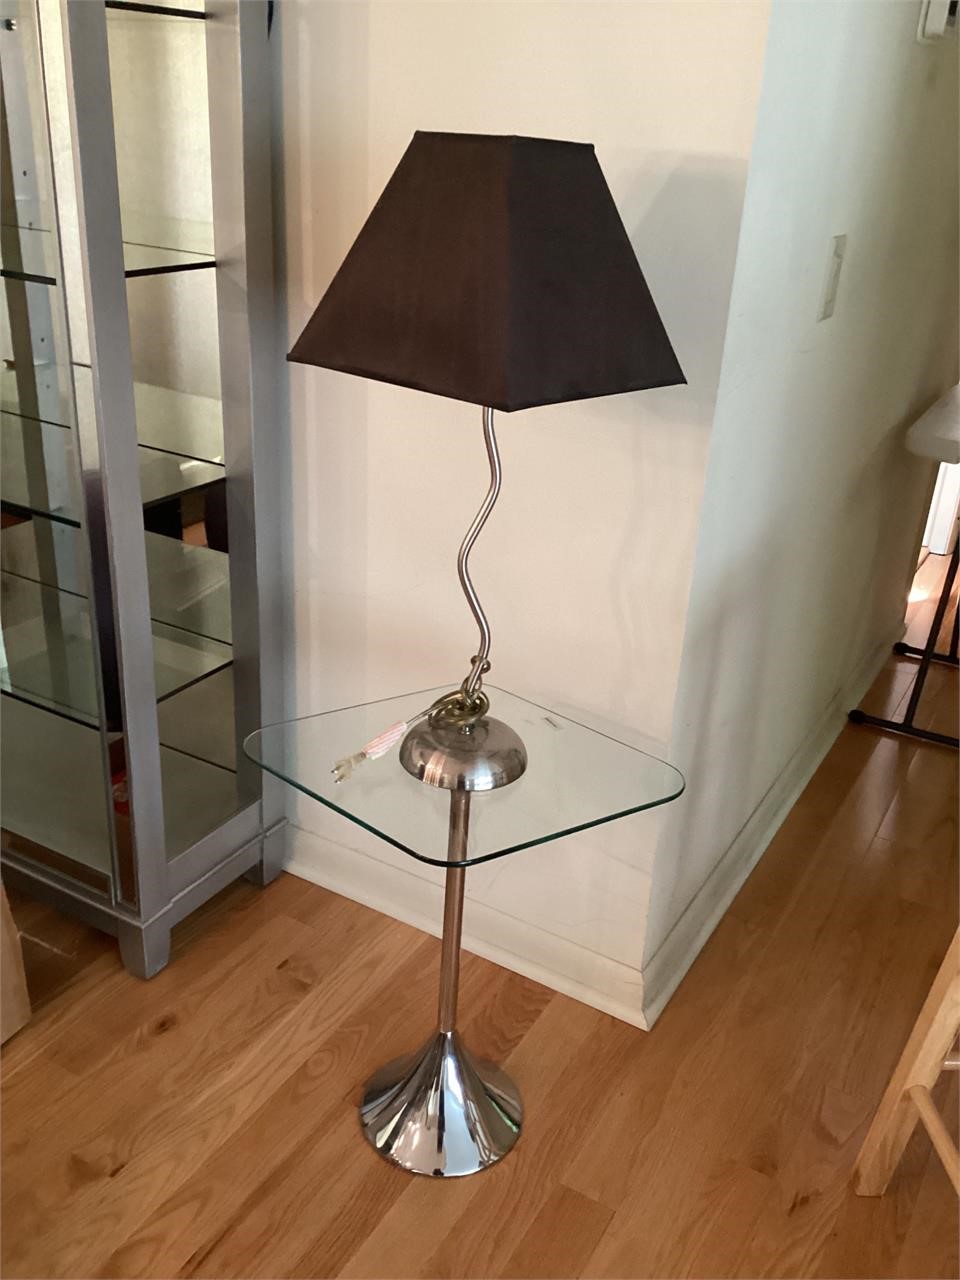 Glass table and lamp